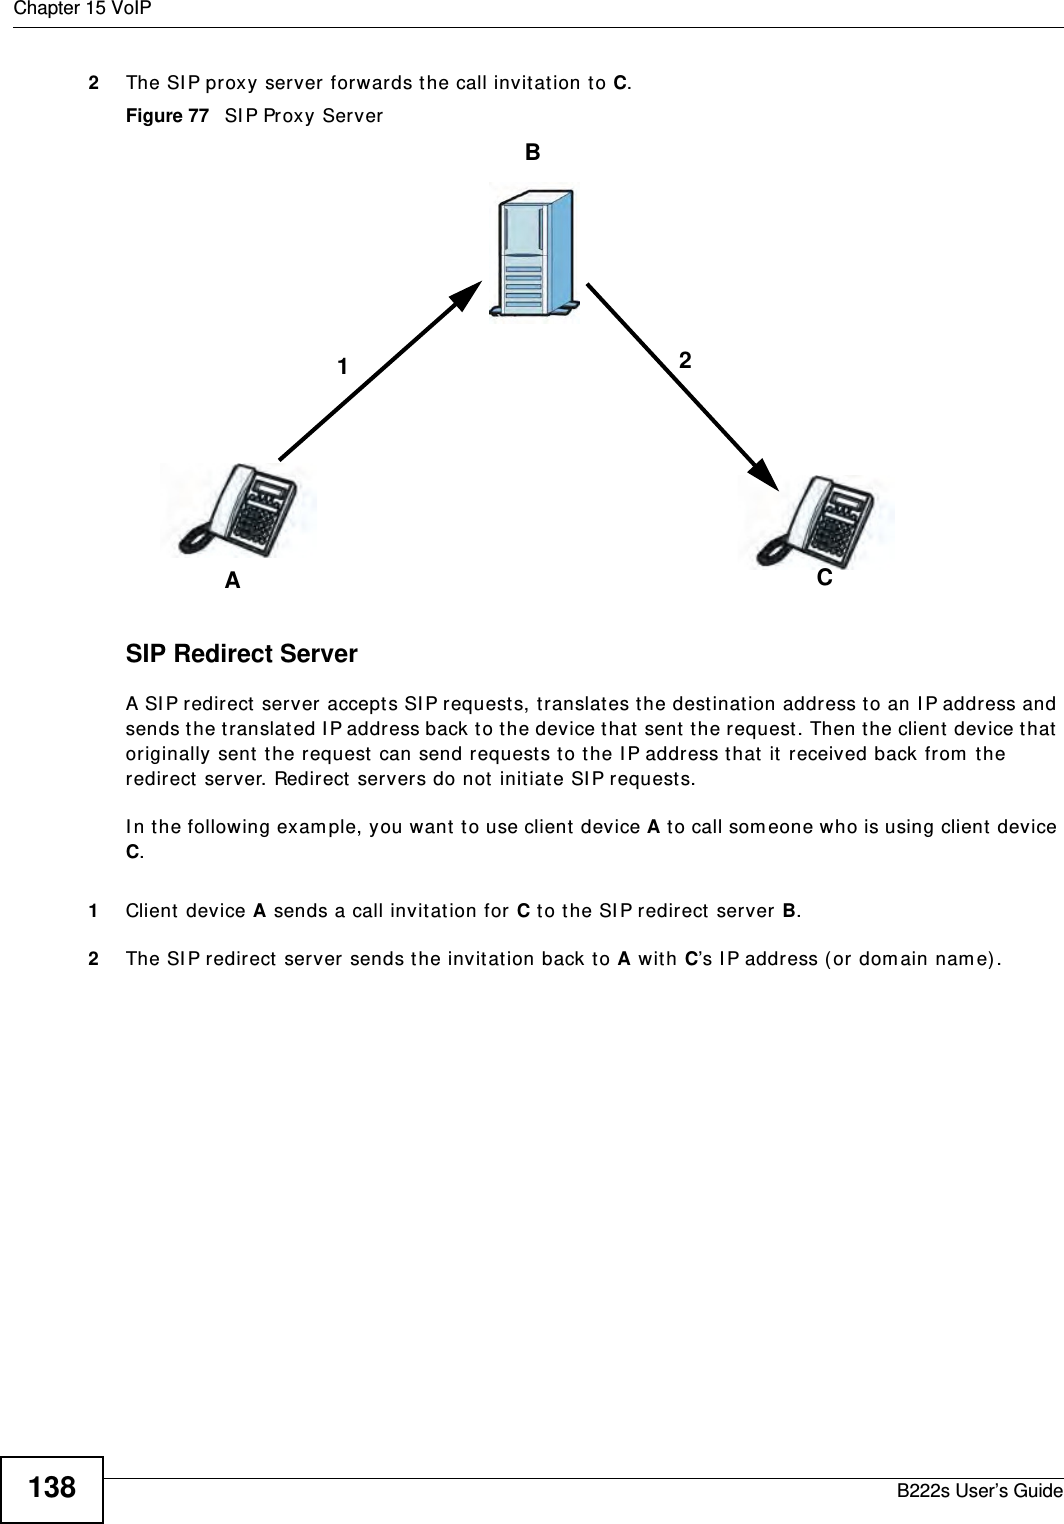 Chapter 15 VoIPB222s User’s Guide1382The SI P proxy server forwards the call invit ation t o C.Figure 77   SI P Proxy ServerSIP Redirect ServerA SI P redirect server accept s SI P requests, t ranslat es the destinat ion address t o an I P address and sends t he t ranslat ed I P address back t o t he device that  sent  t he request . Then t he client  device t hat  originally sent  t he request  can send request s t o the I P address that  it  received back from  the redirect  server. Redirect  servers do not init iate SI P request s. I n t he following exam ple, you want  t o use client  device A t o call som eone who is using client device C. 1Client device A sends a call invitat ion for C t o t he SI P redirect  server B.2The SI P redirect server sends t he invitat ion back t o A wit h C’s I P address ( or dom ain nam e) .BAC12